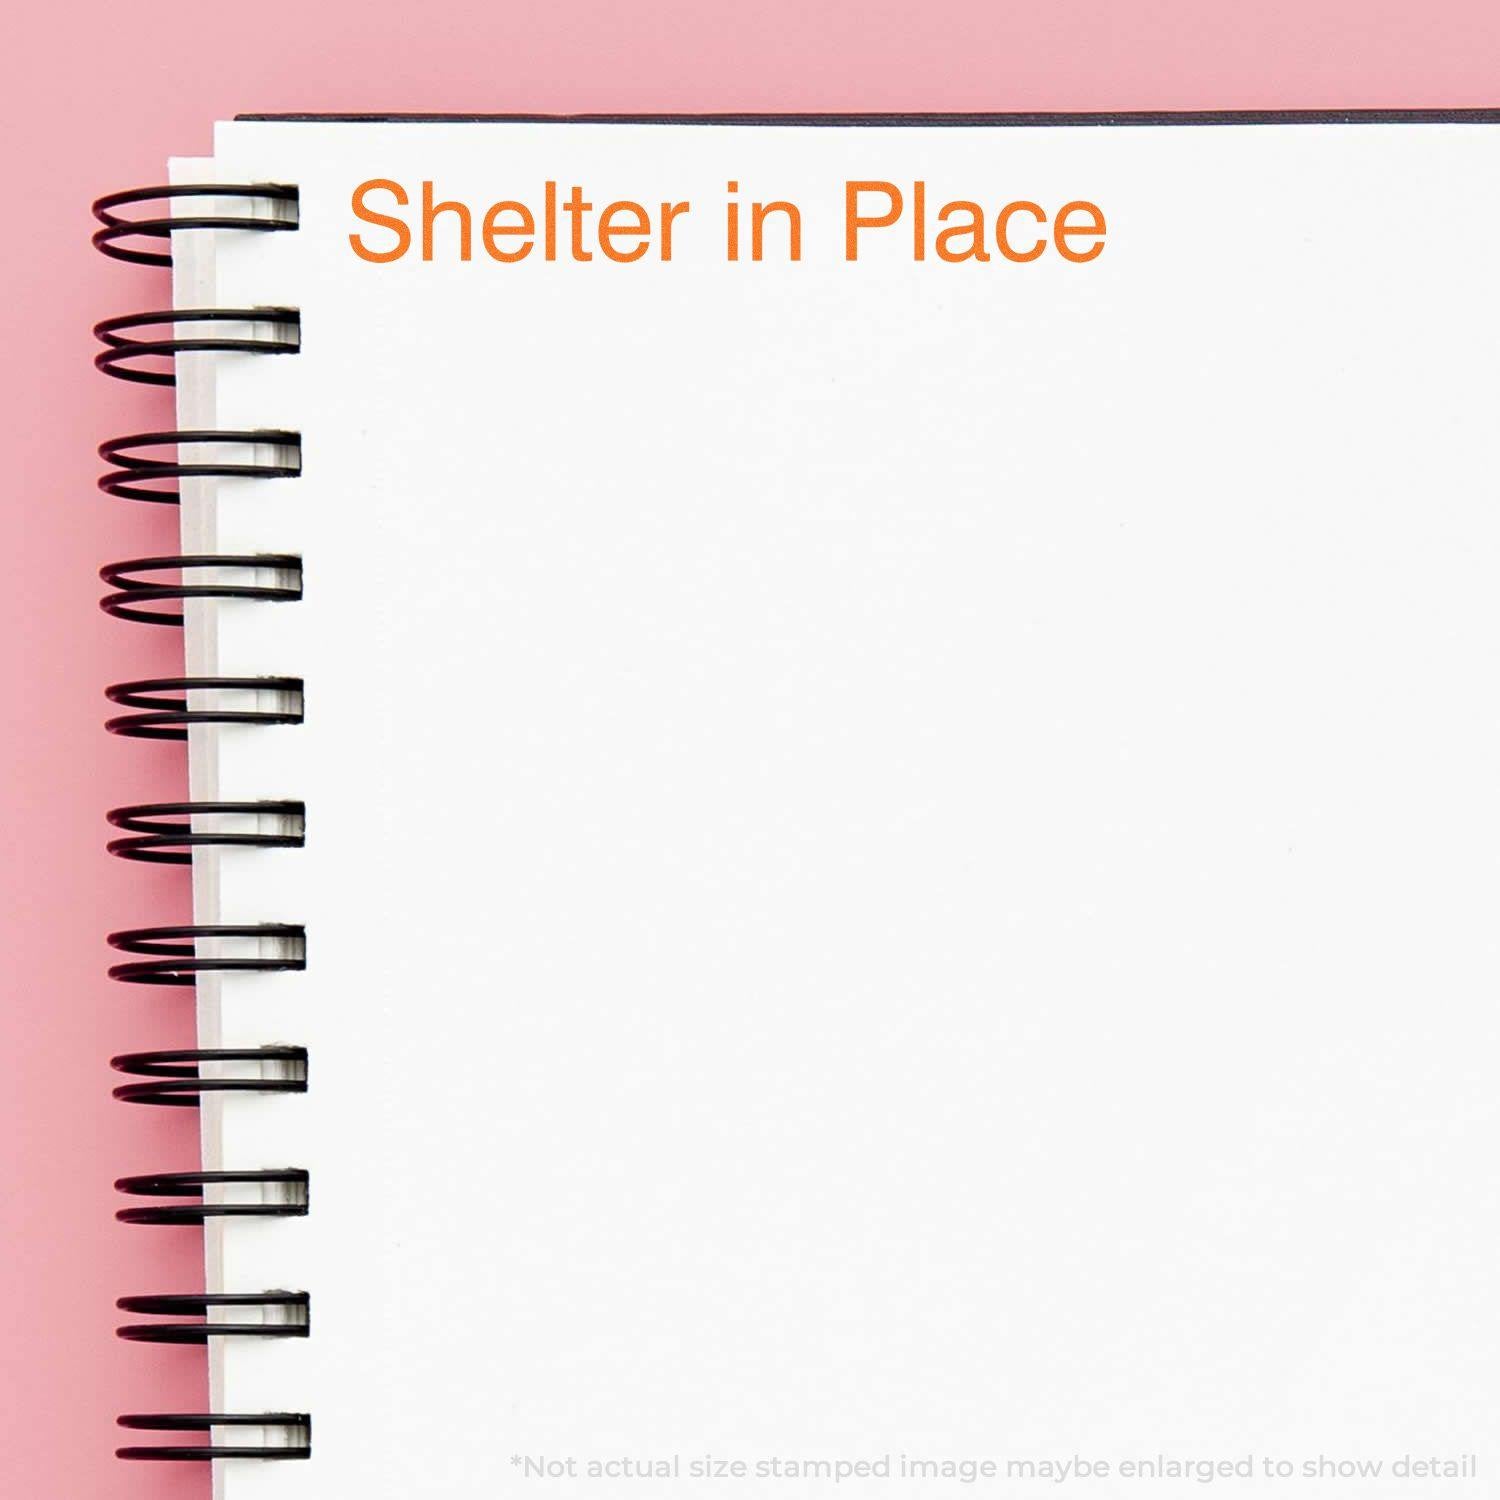 A self-inking stamp with a stamped image showing how the text "Shelter in Place" is displayed after stamping.